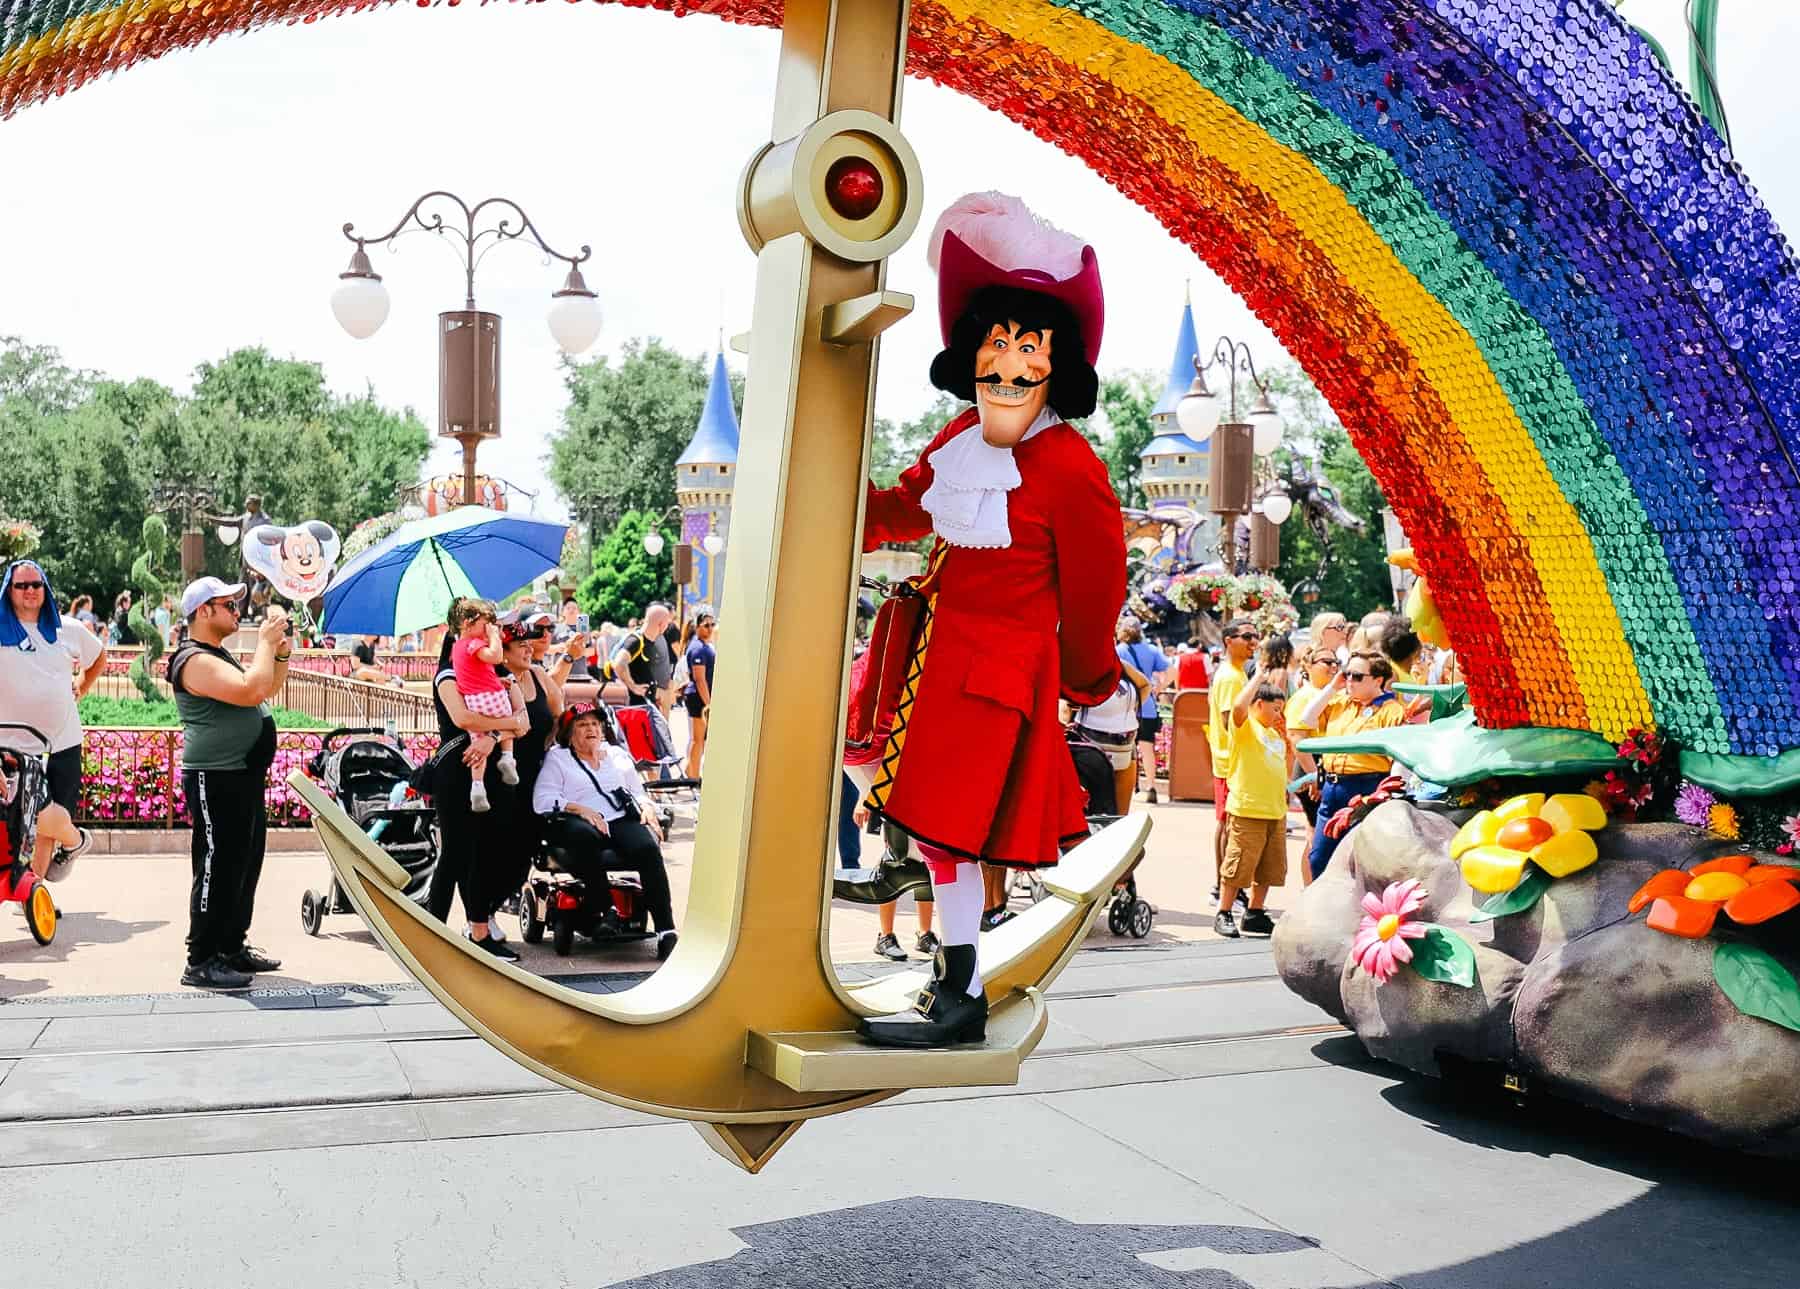 Captain Hook balancing on an anchor in a parade float. 